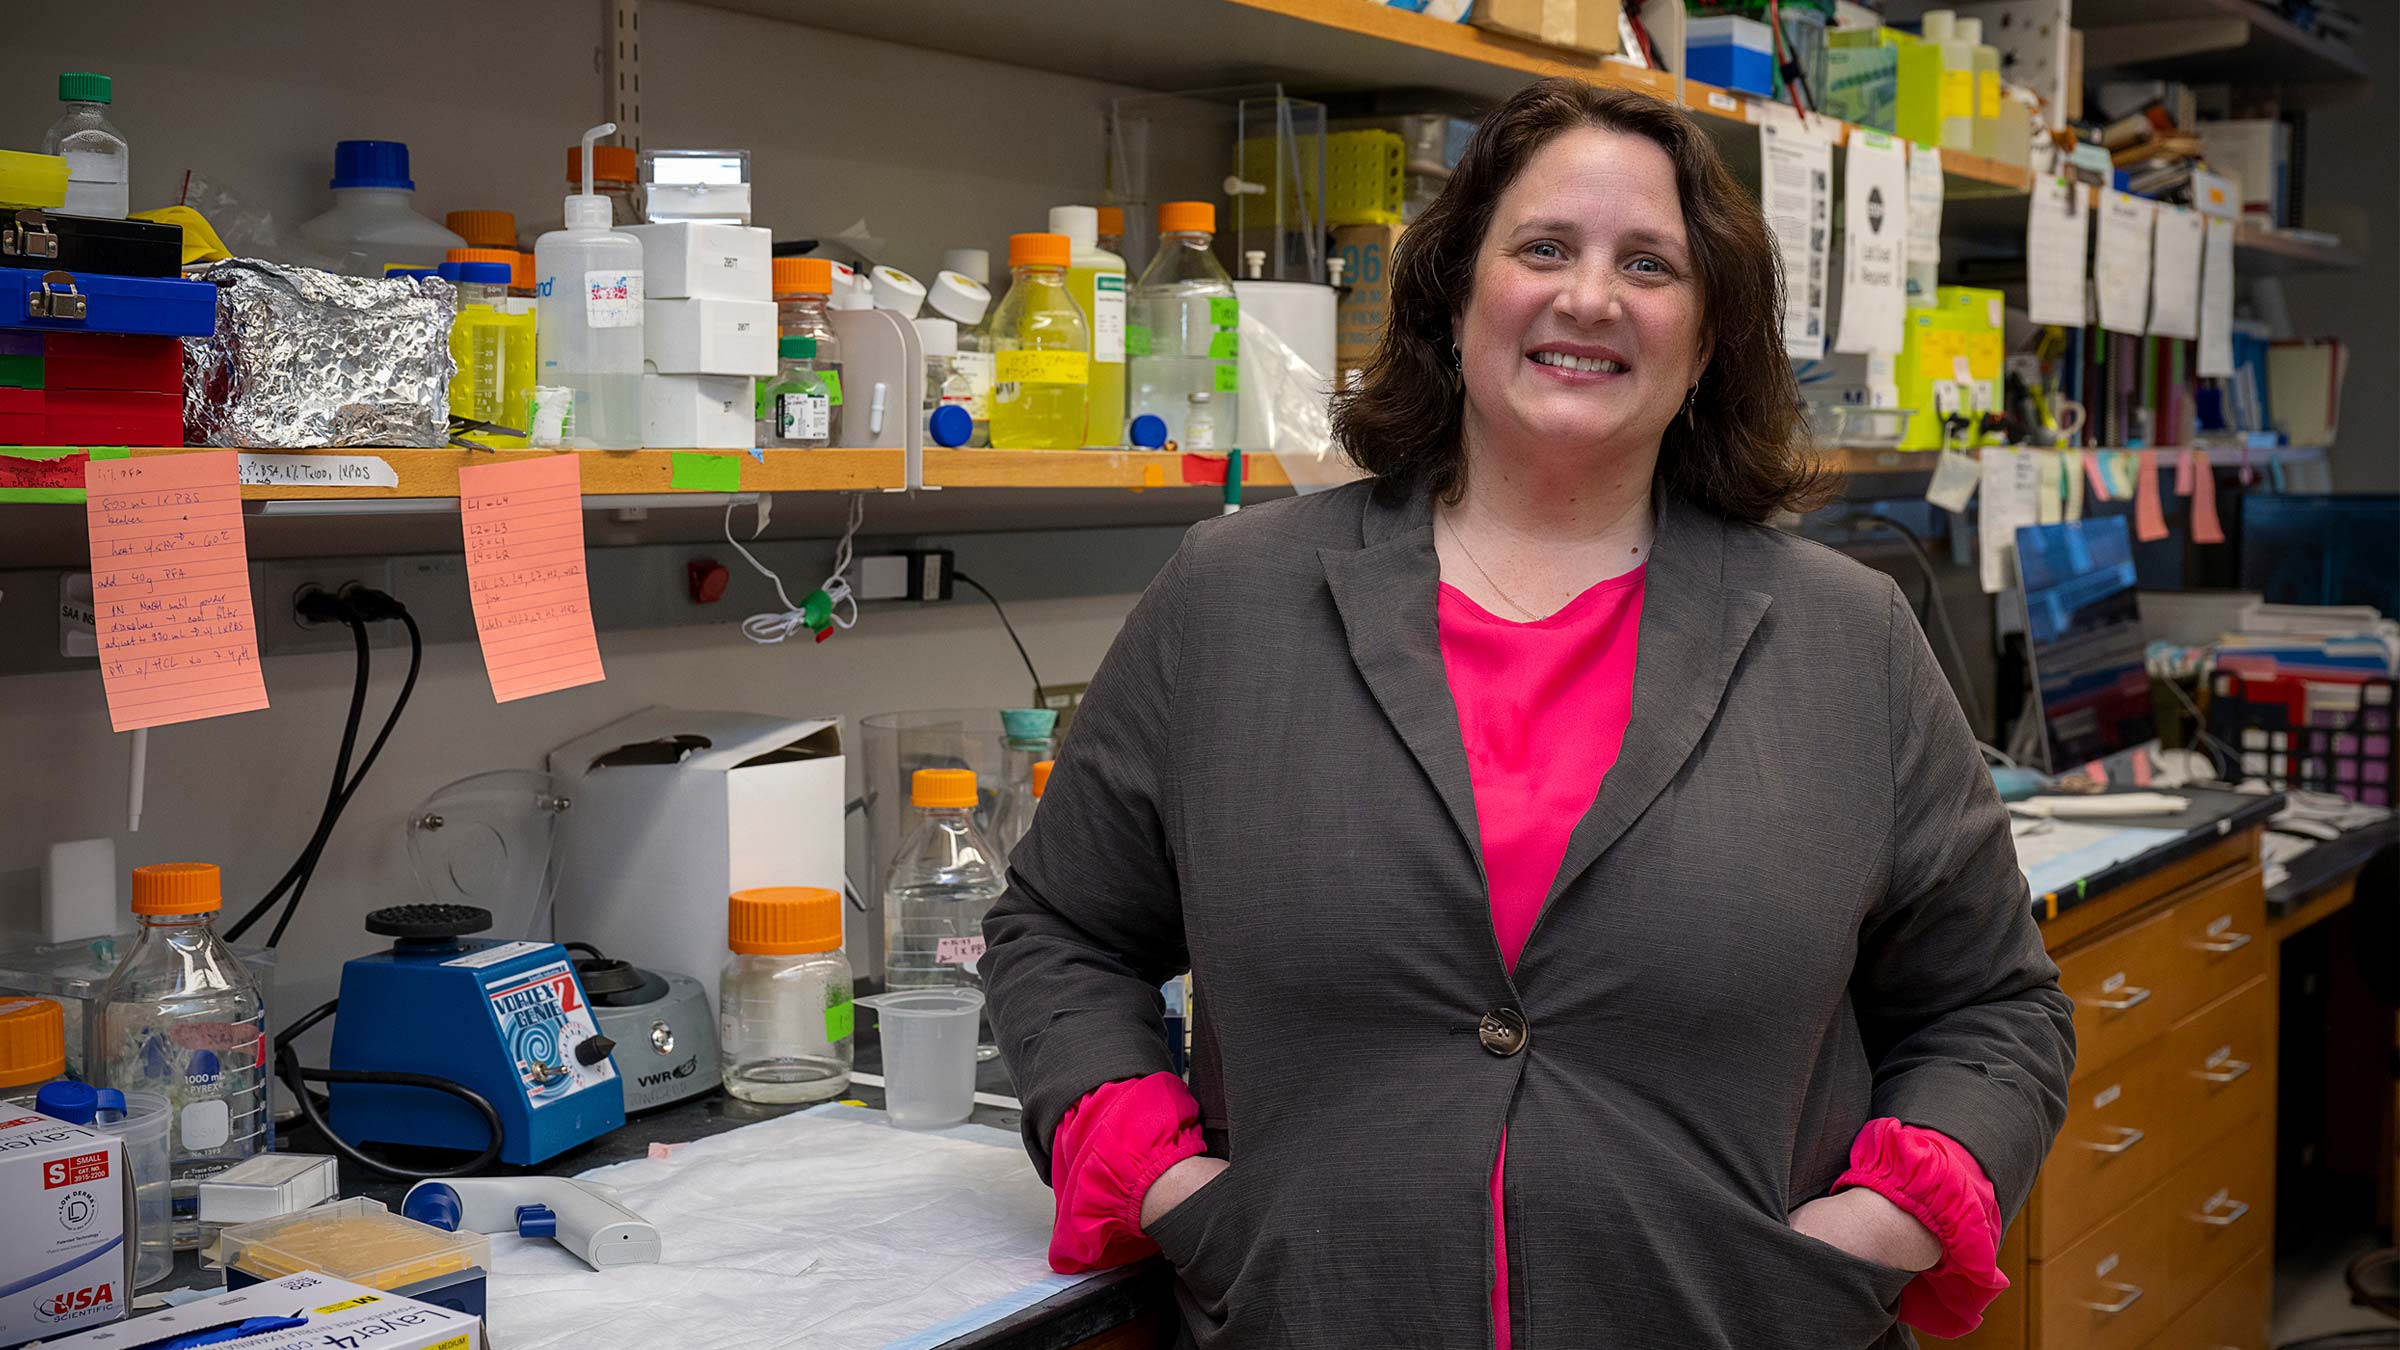 Kristy Townsend, PhD in her laboratory at Ohio State